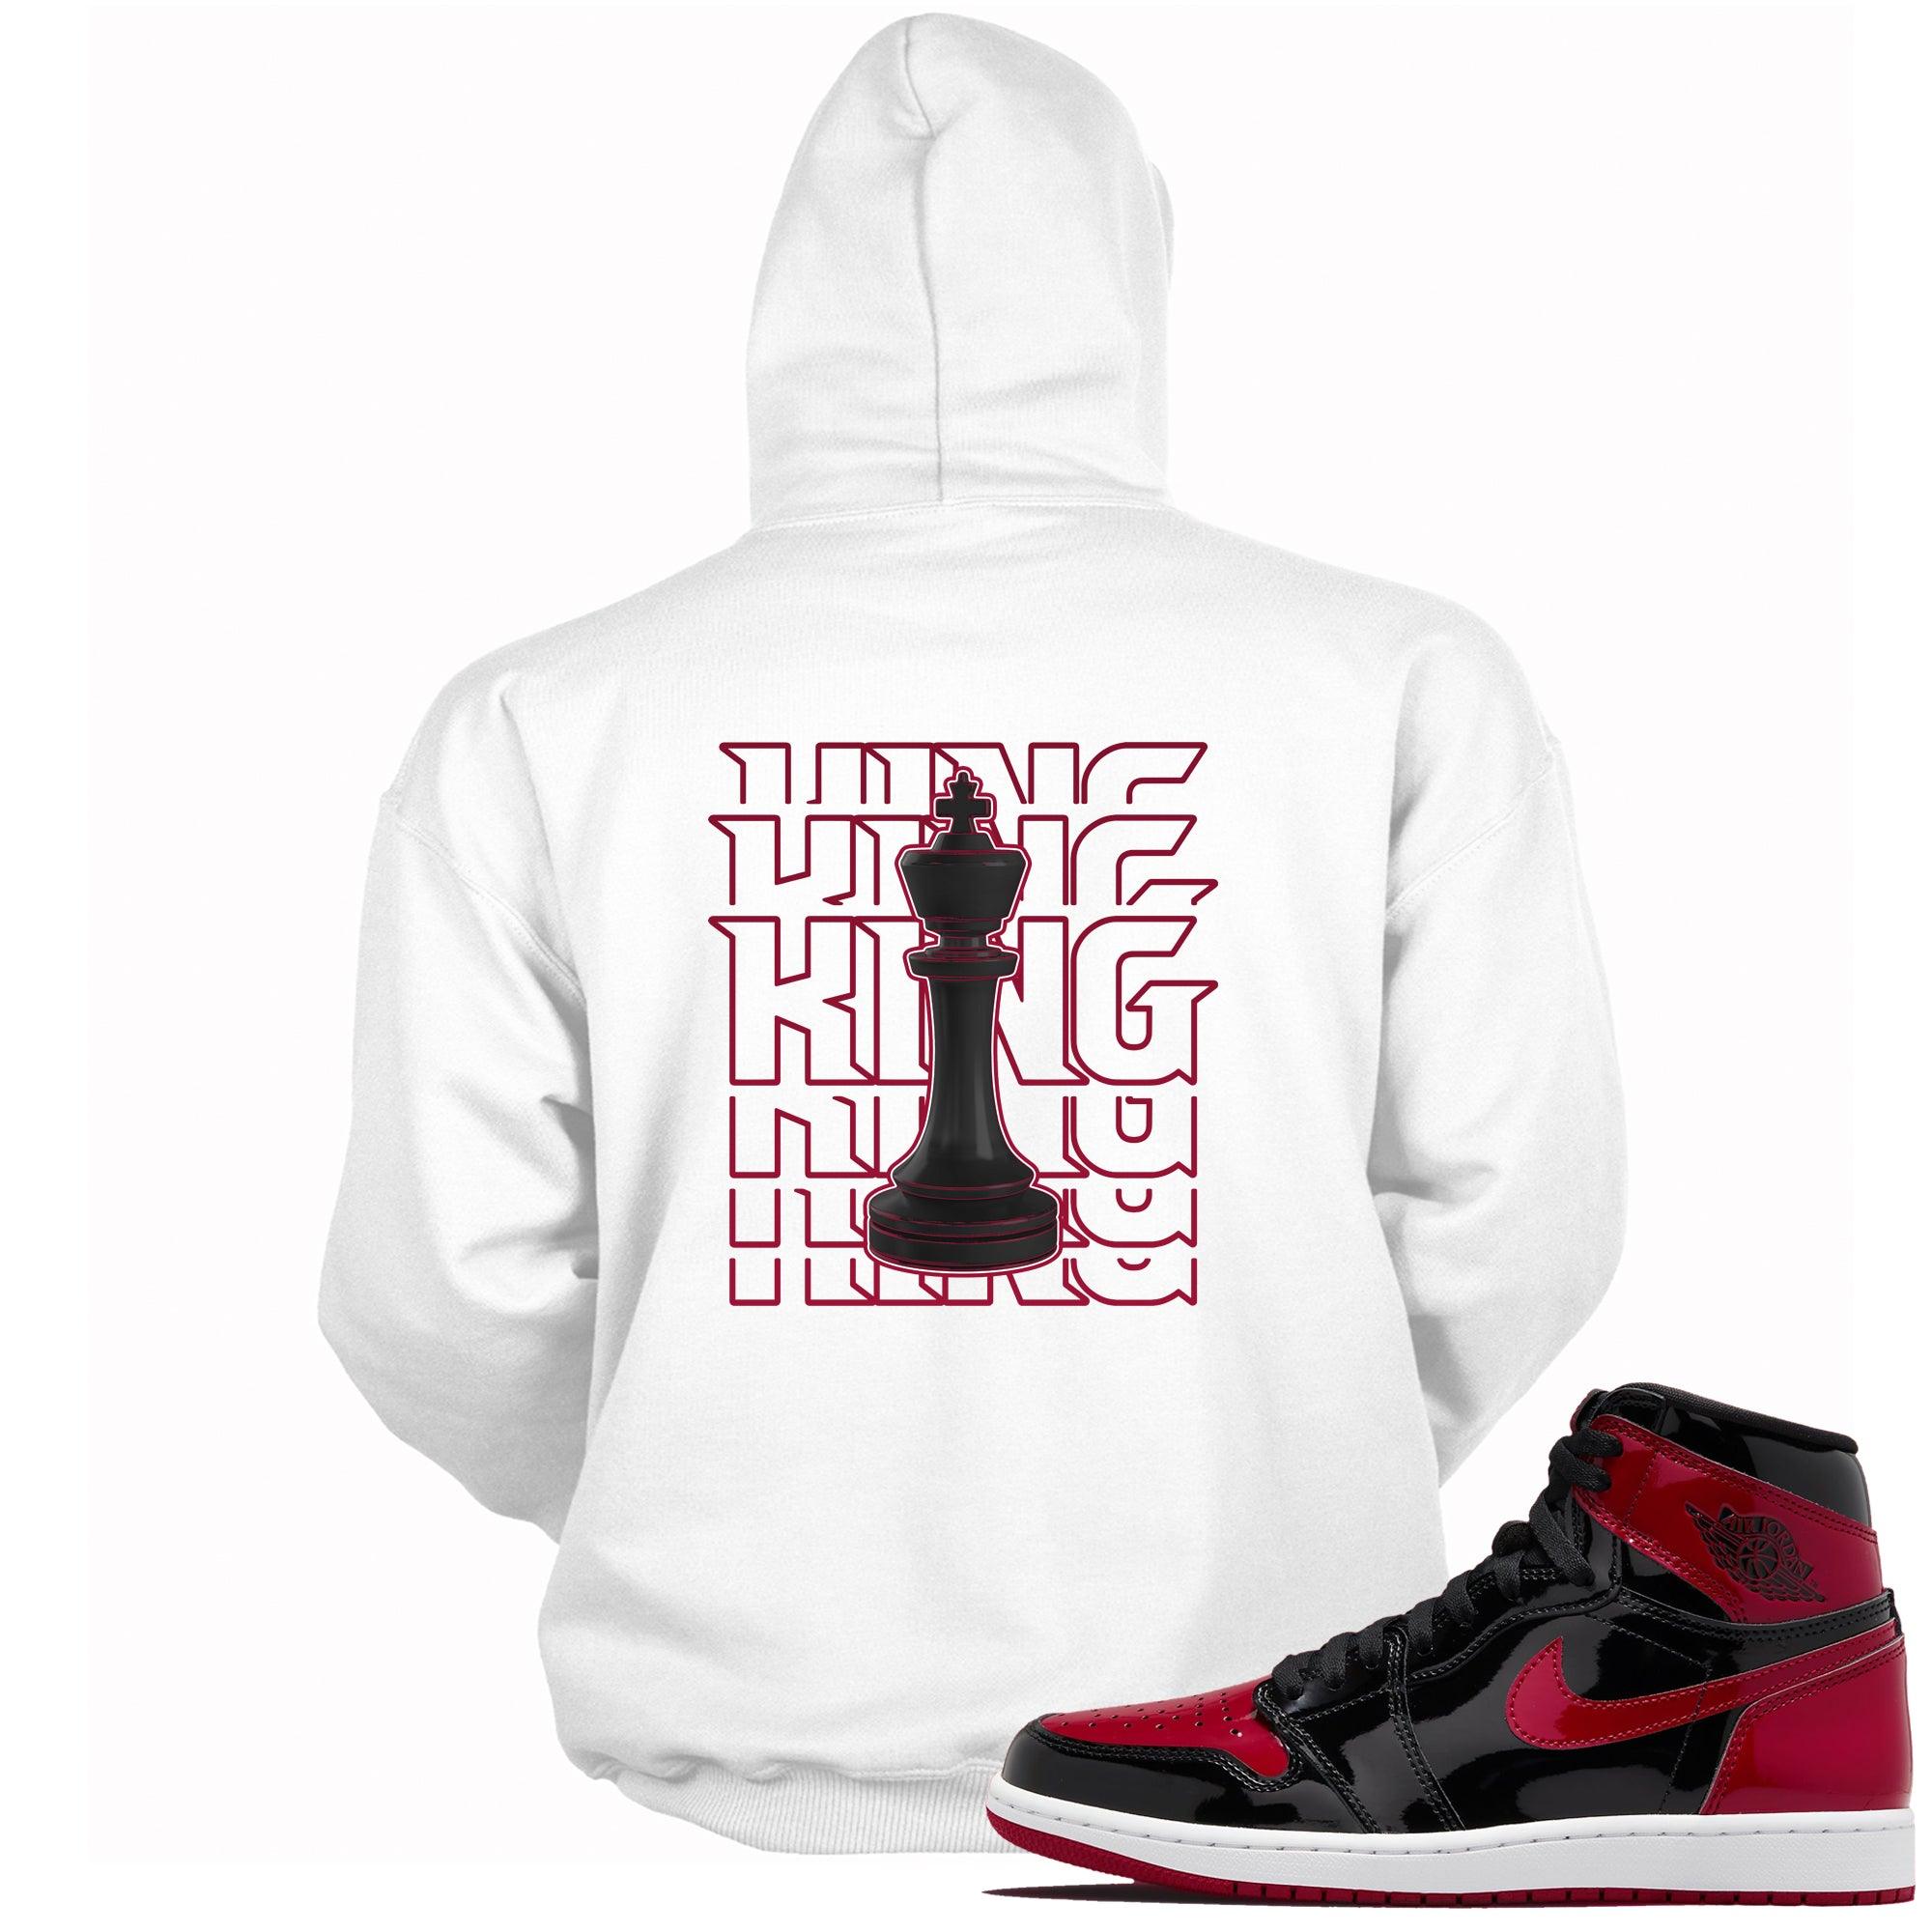 King Chess Hoodie AJ 1s Patent Leather Bred Air HOLIDAY photo